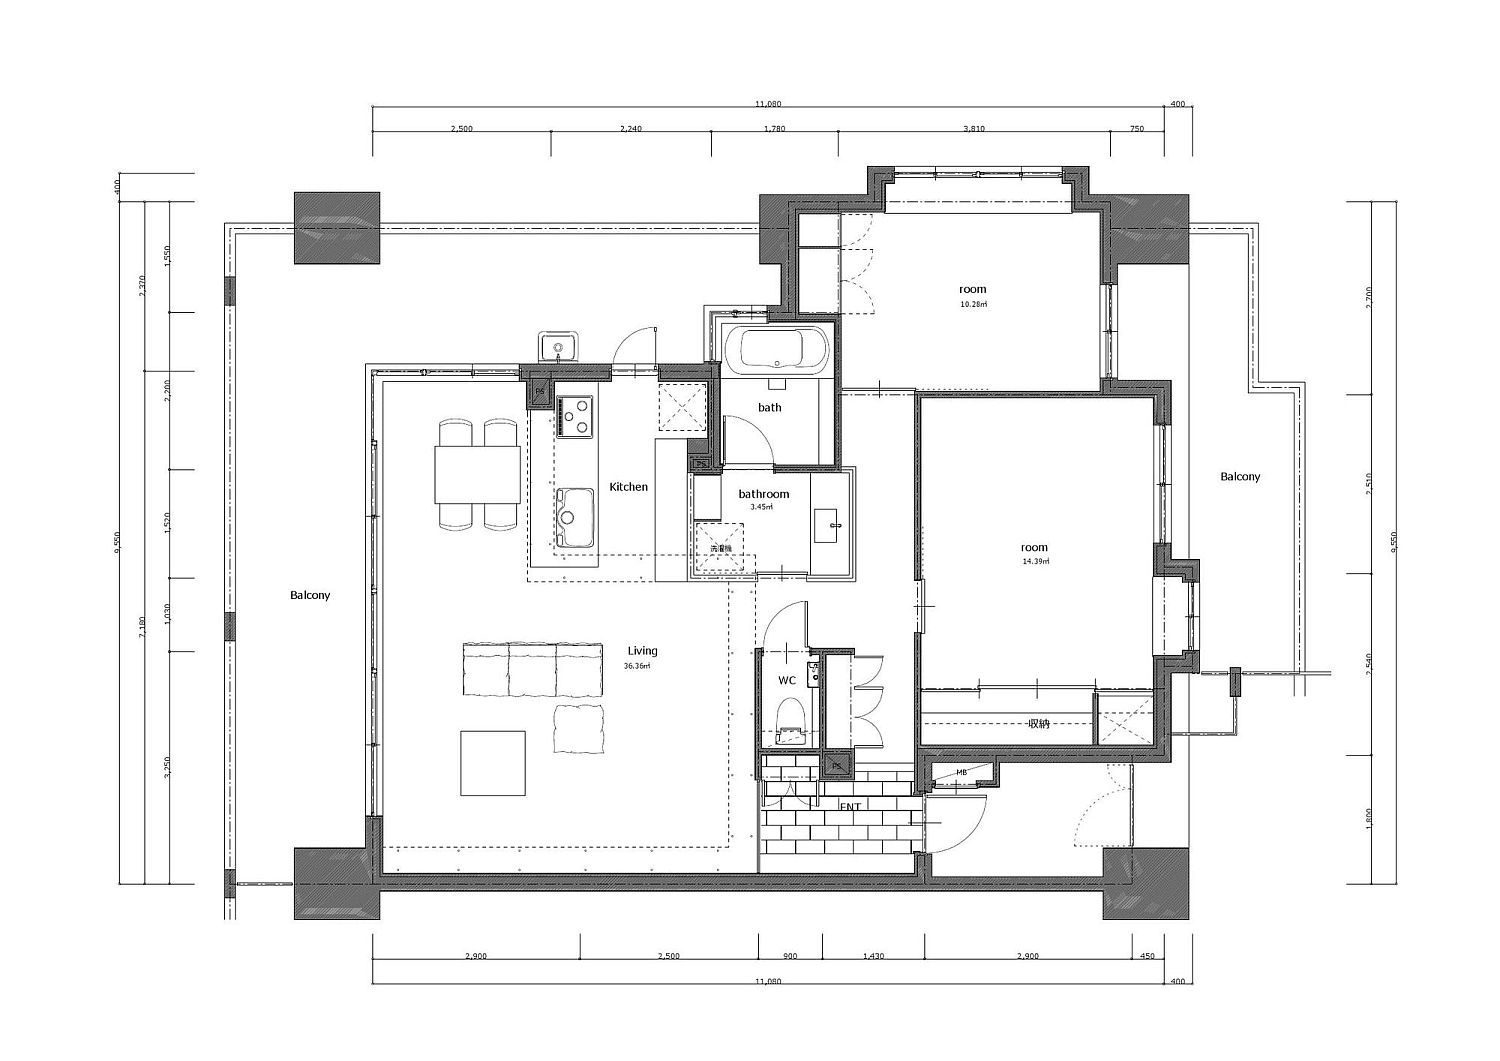 Floor-plan-of-the-renovated-Nionohama-apartment-in-Japan